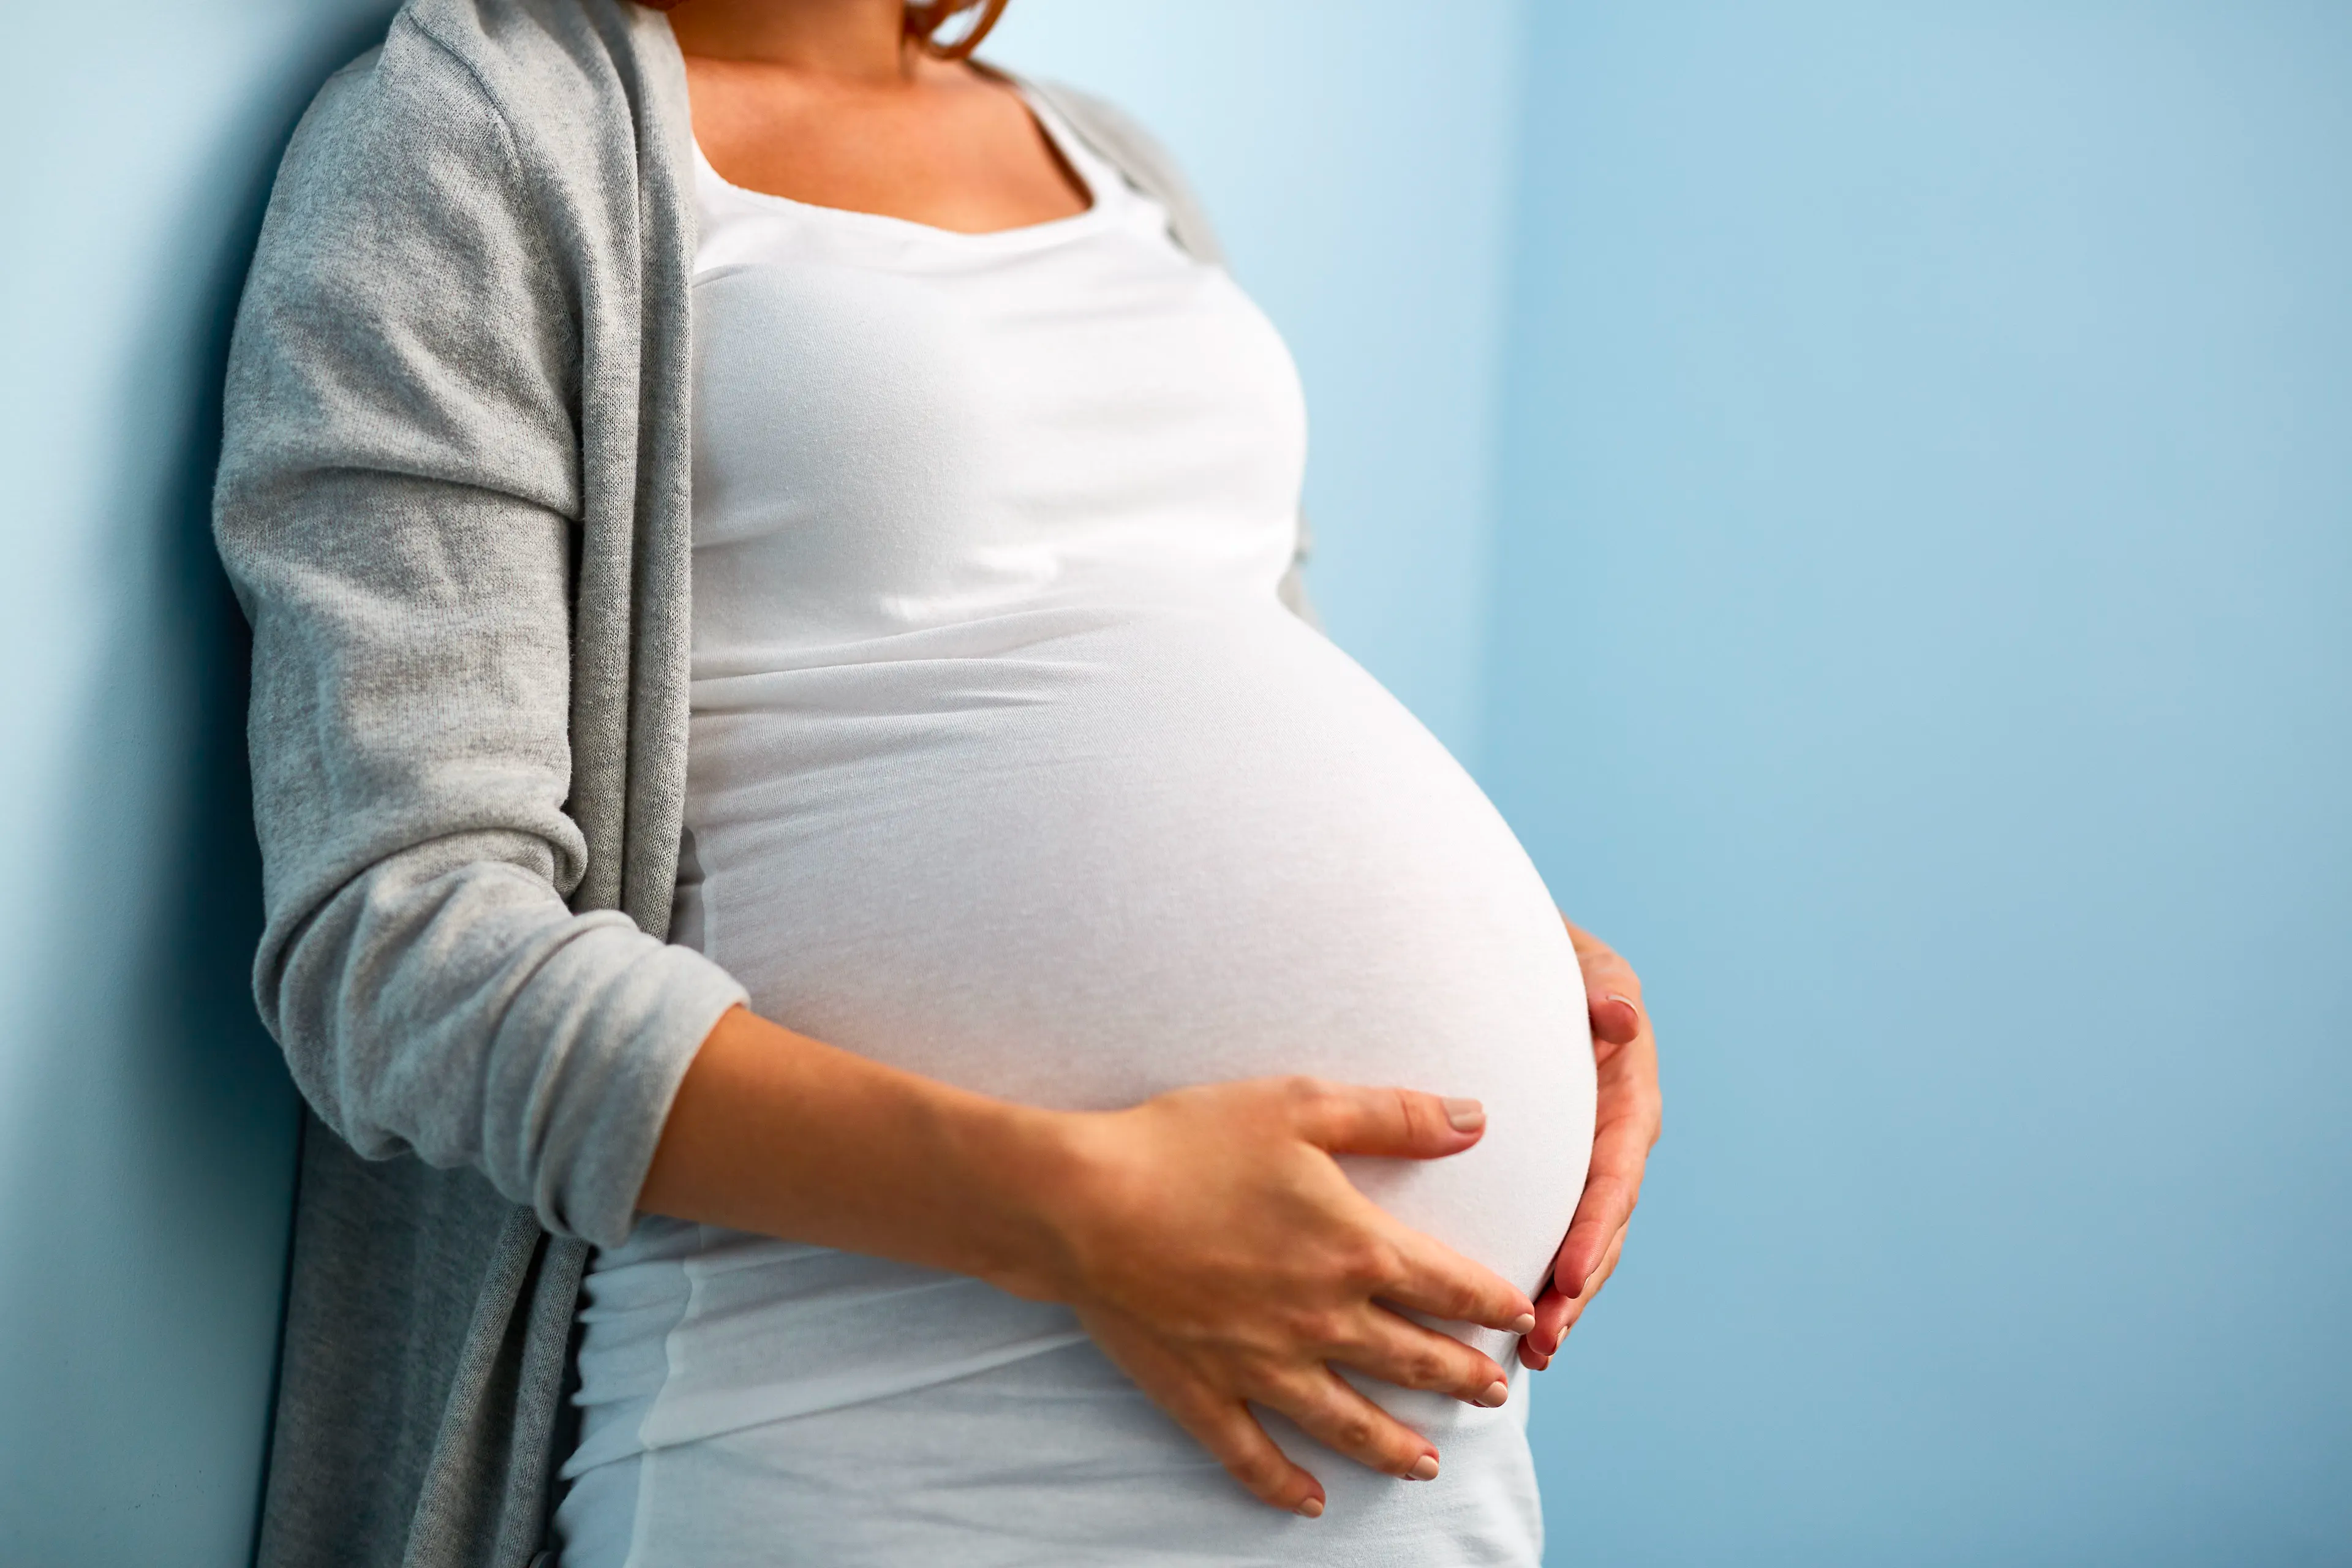 COVID-19 pandemic associated with changes in gestational weight gain | Image Credit: © pressmaster - © pressmaster - stock.adobe.com.